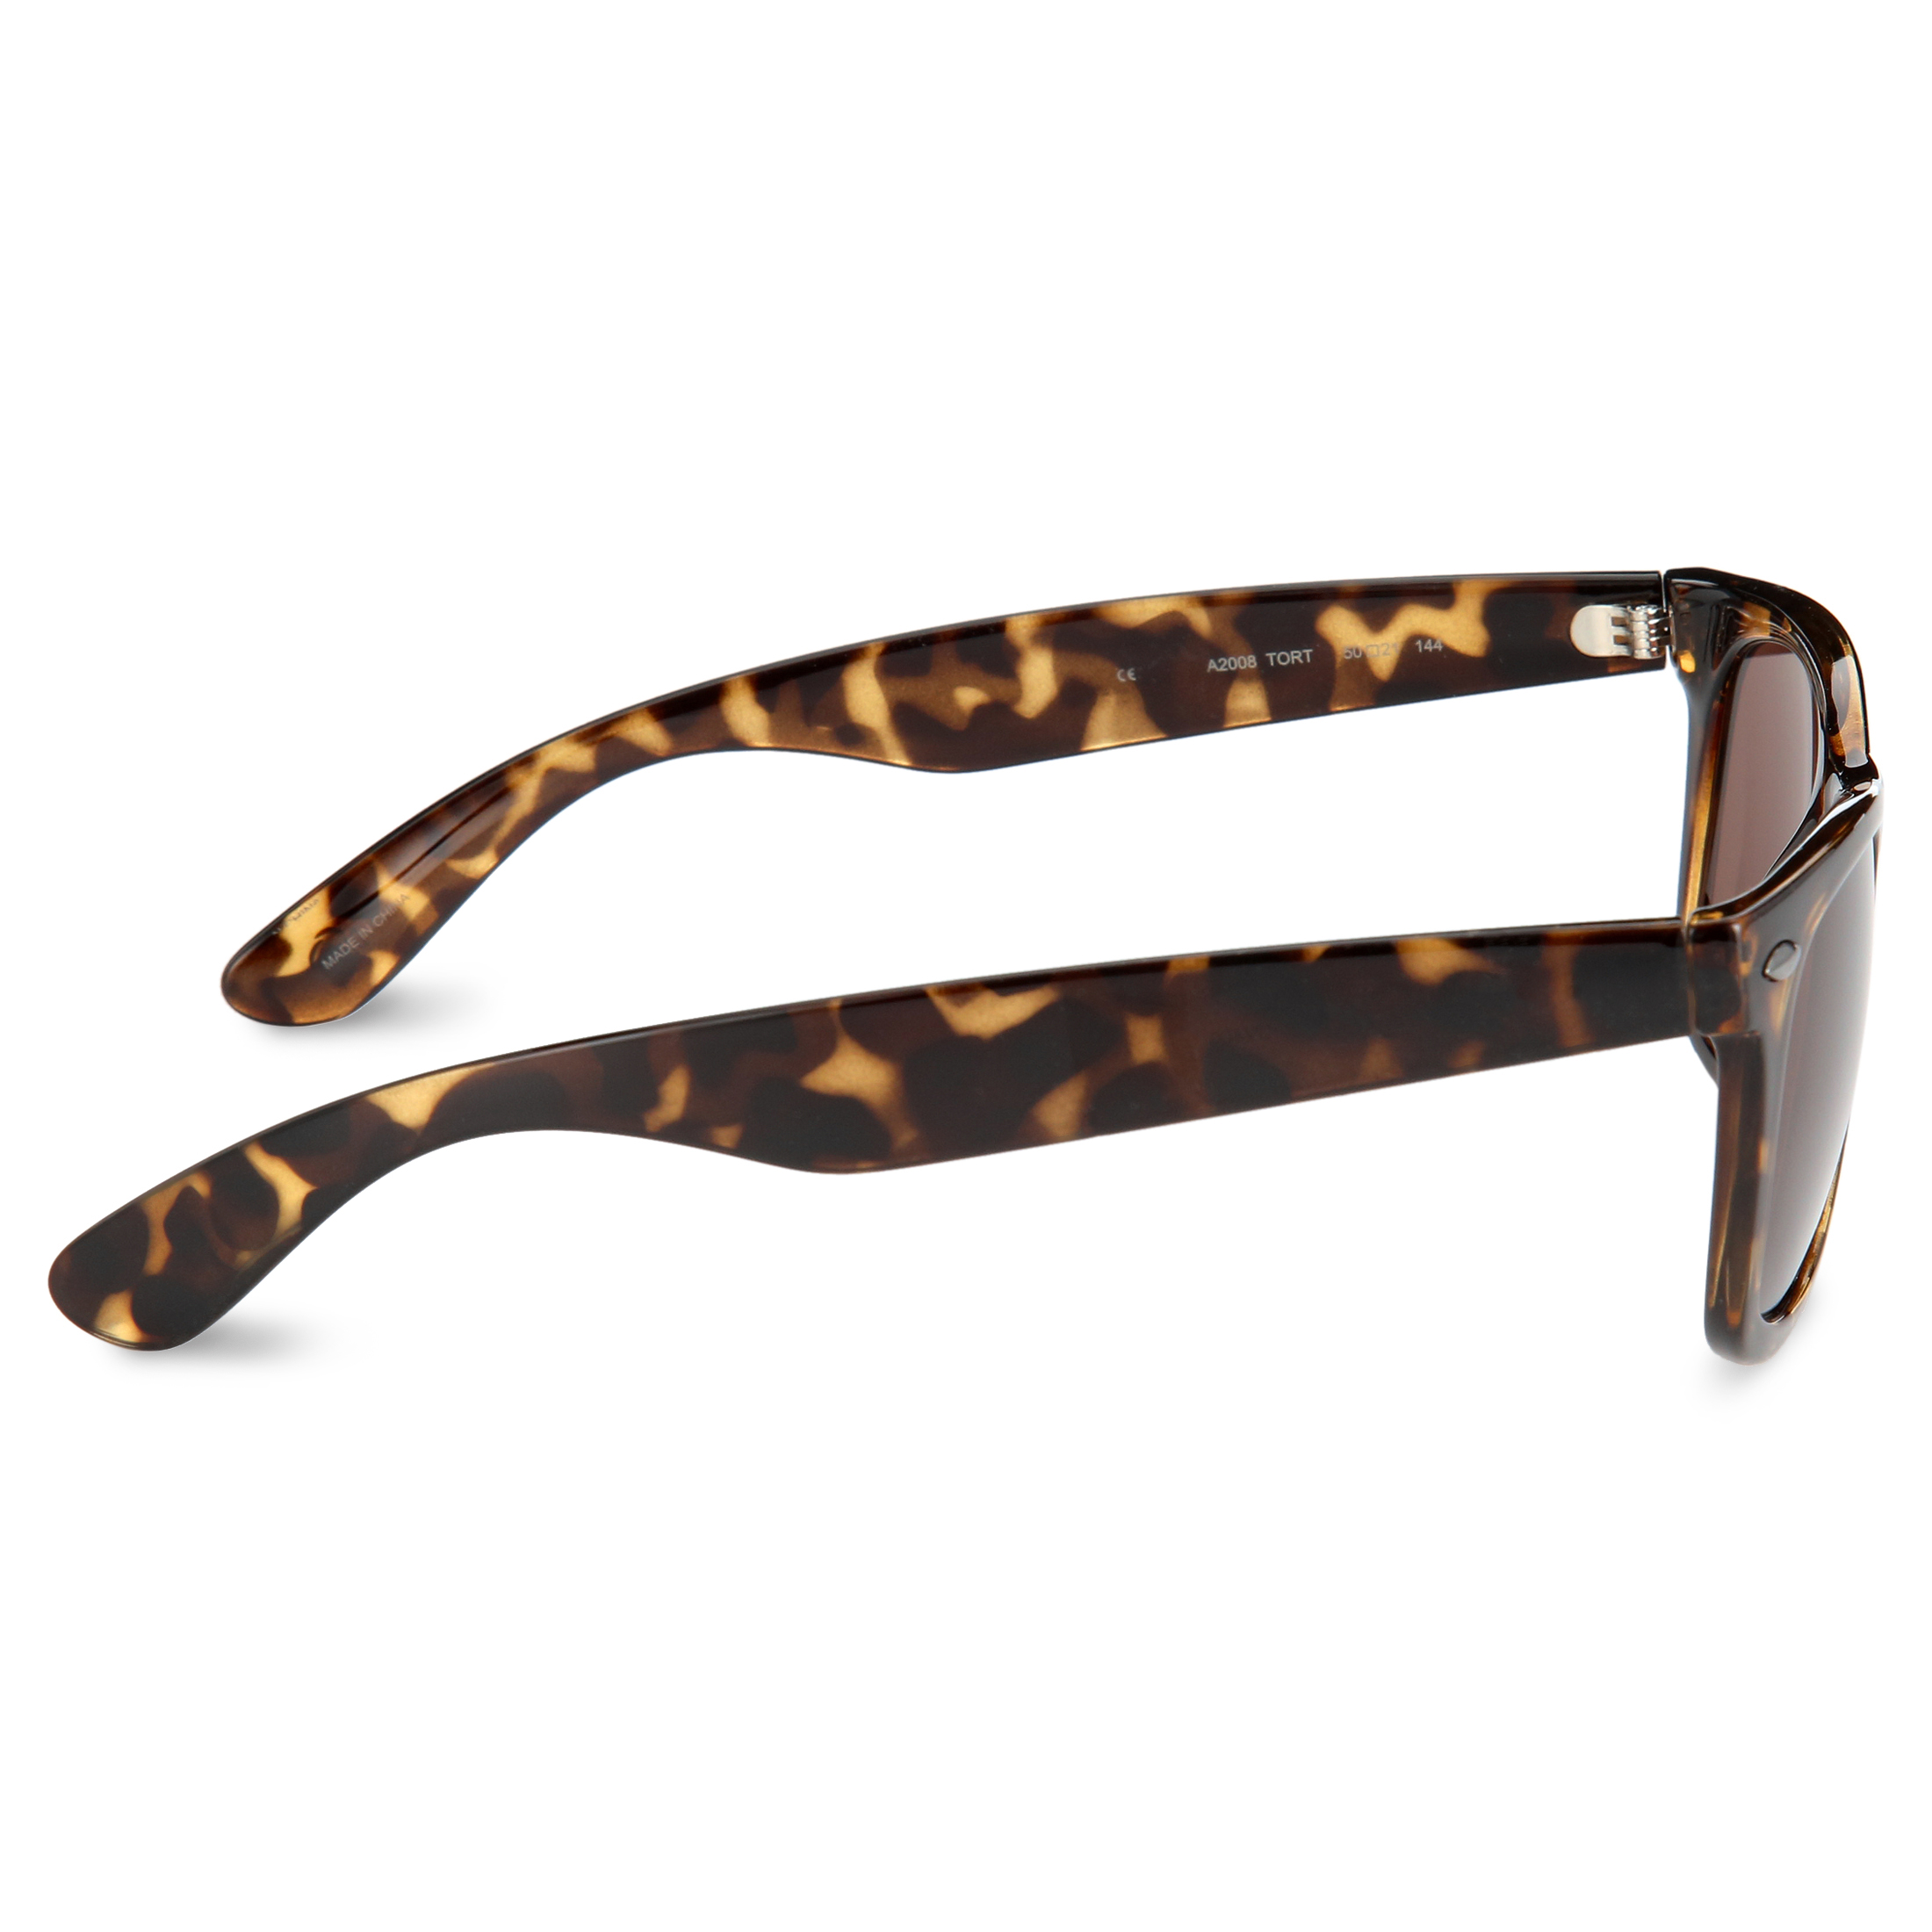 DNA Womens Rx'able Sunglasses, A2008, Tortoise, 50-21-148 - image 3 of 6